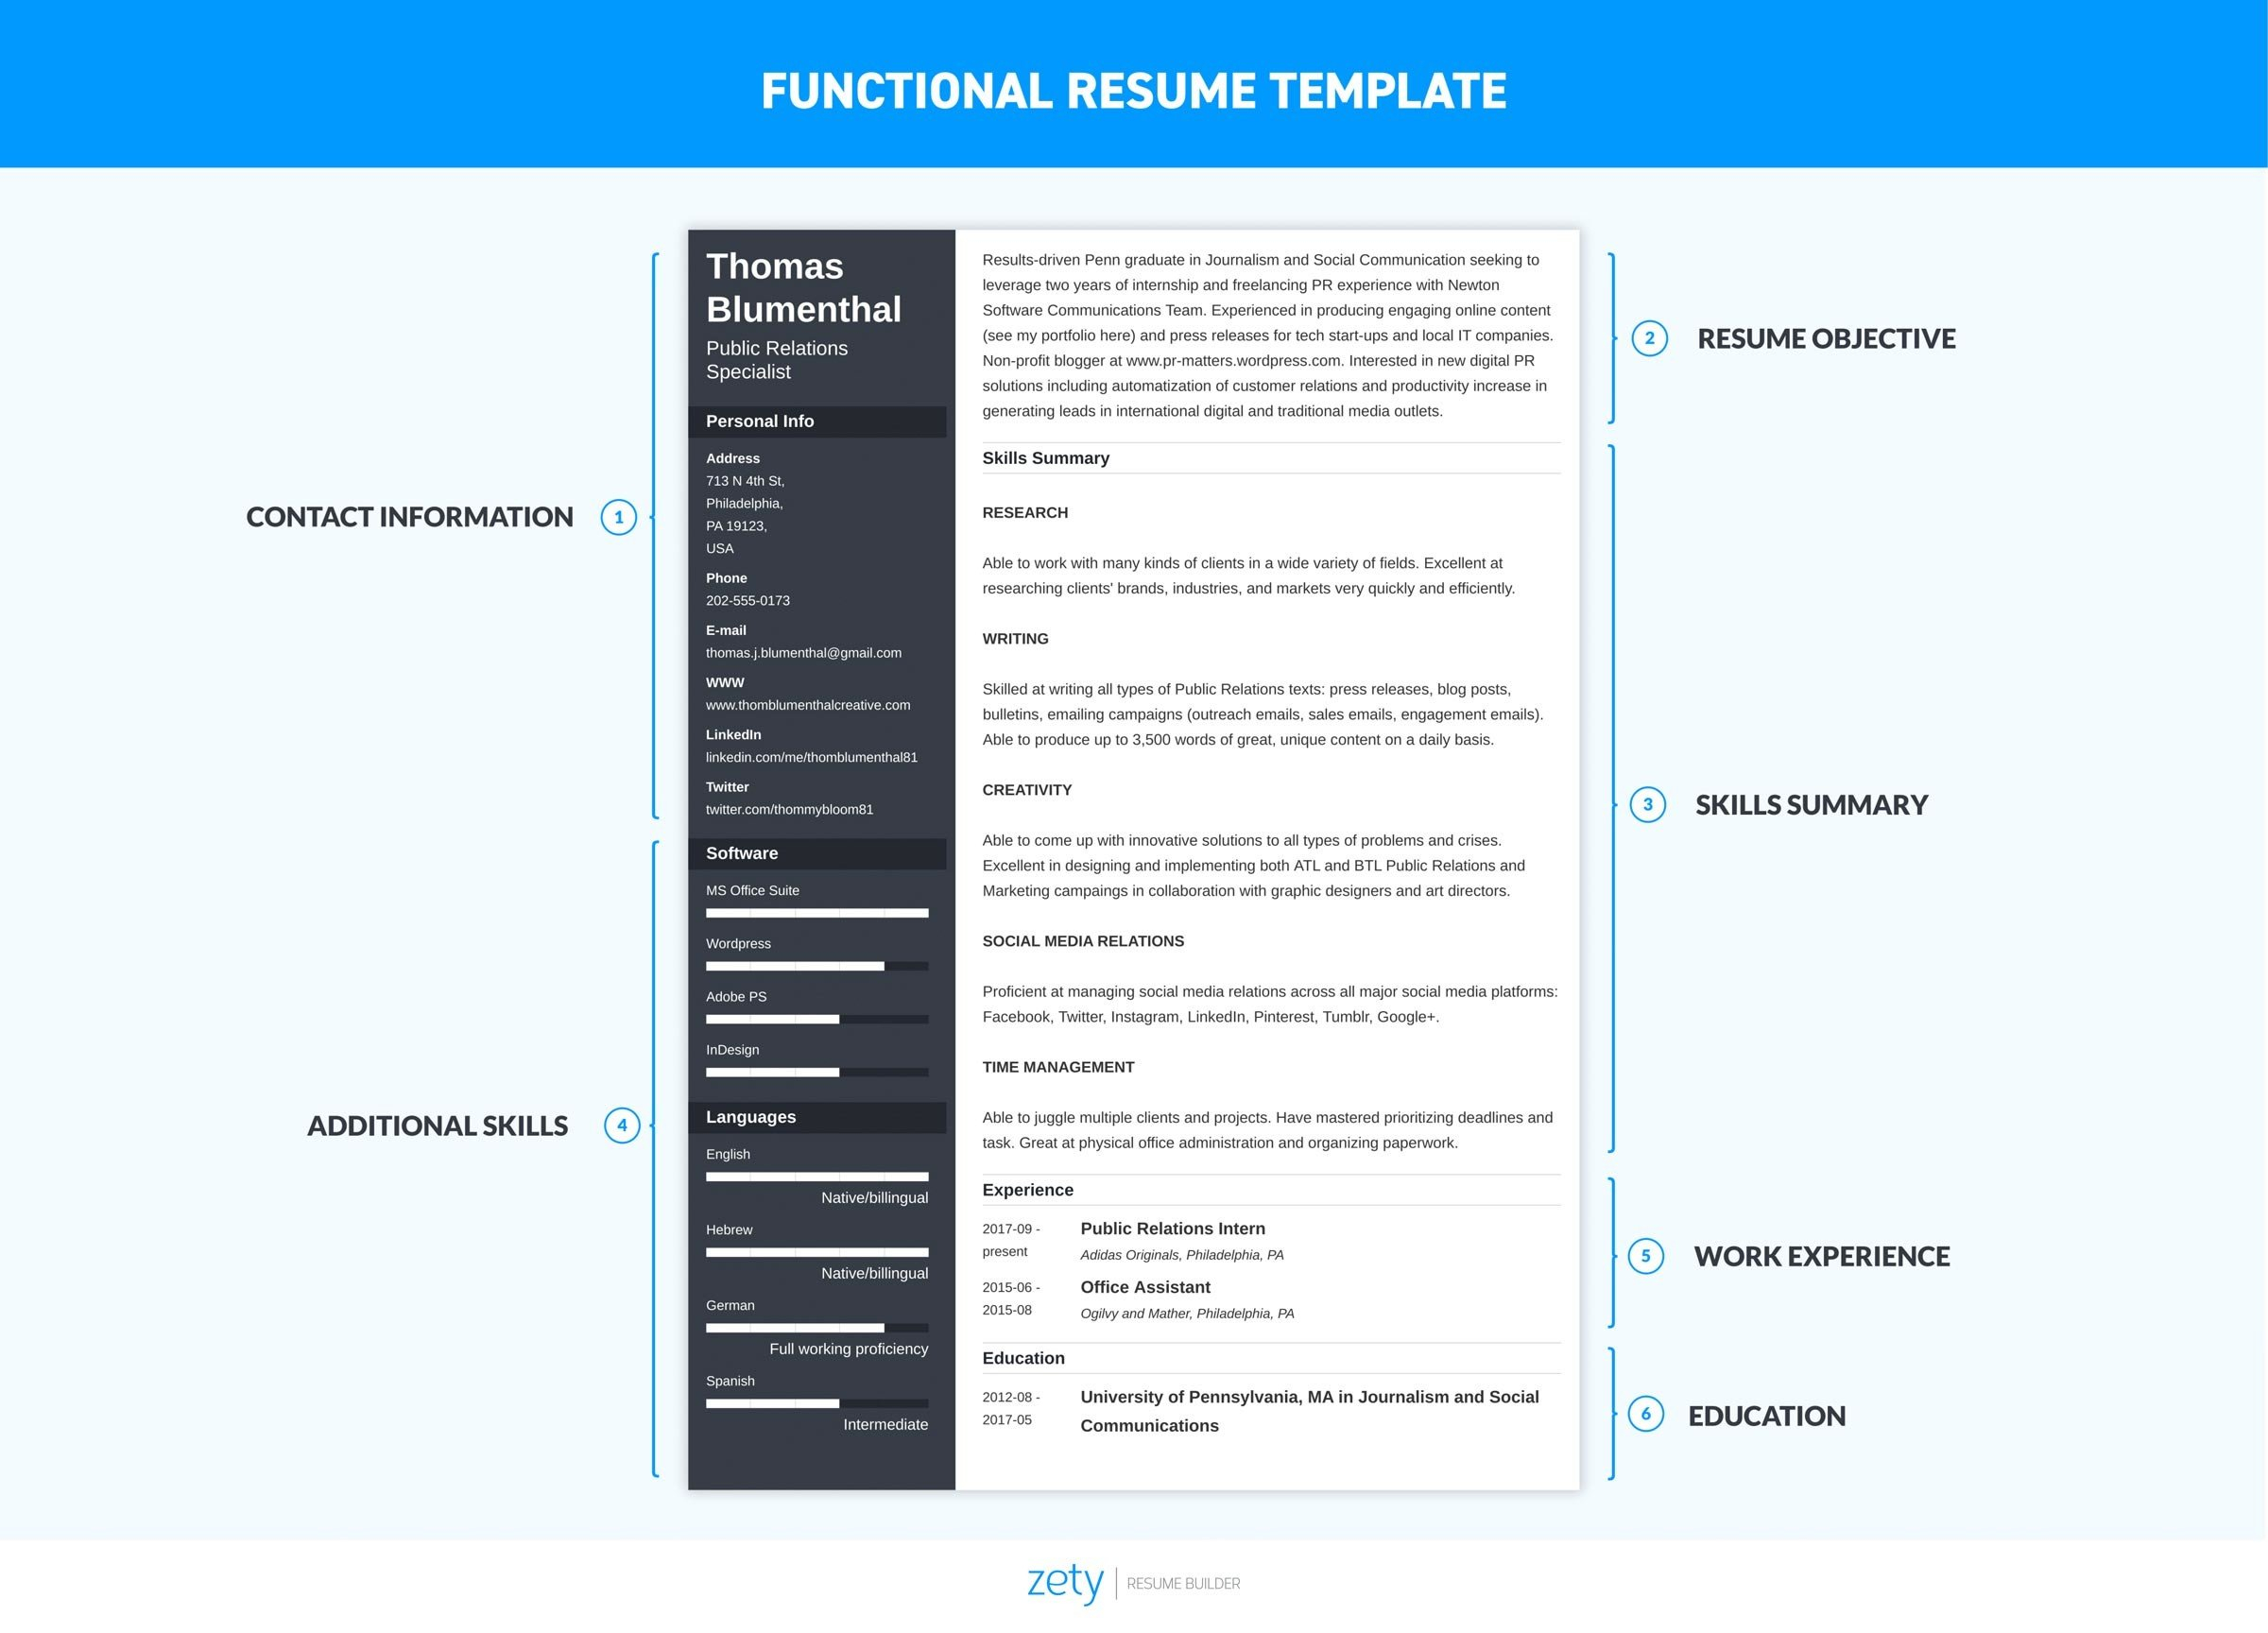 Functional Resume Examples Skills Based Templates with regard to dimensions 2400 X 1728